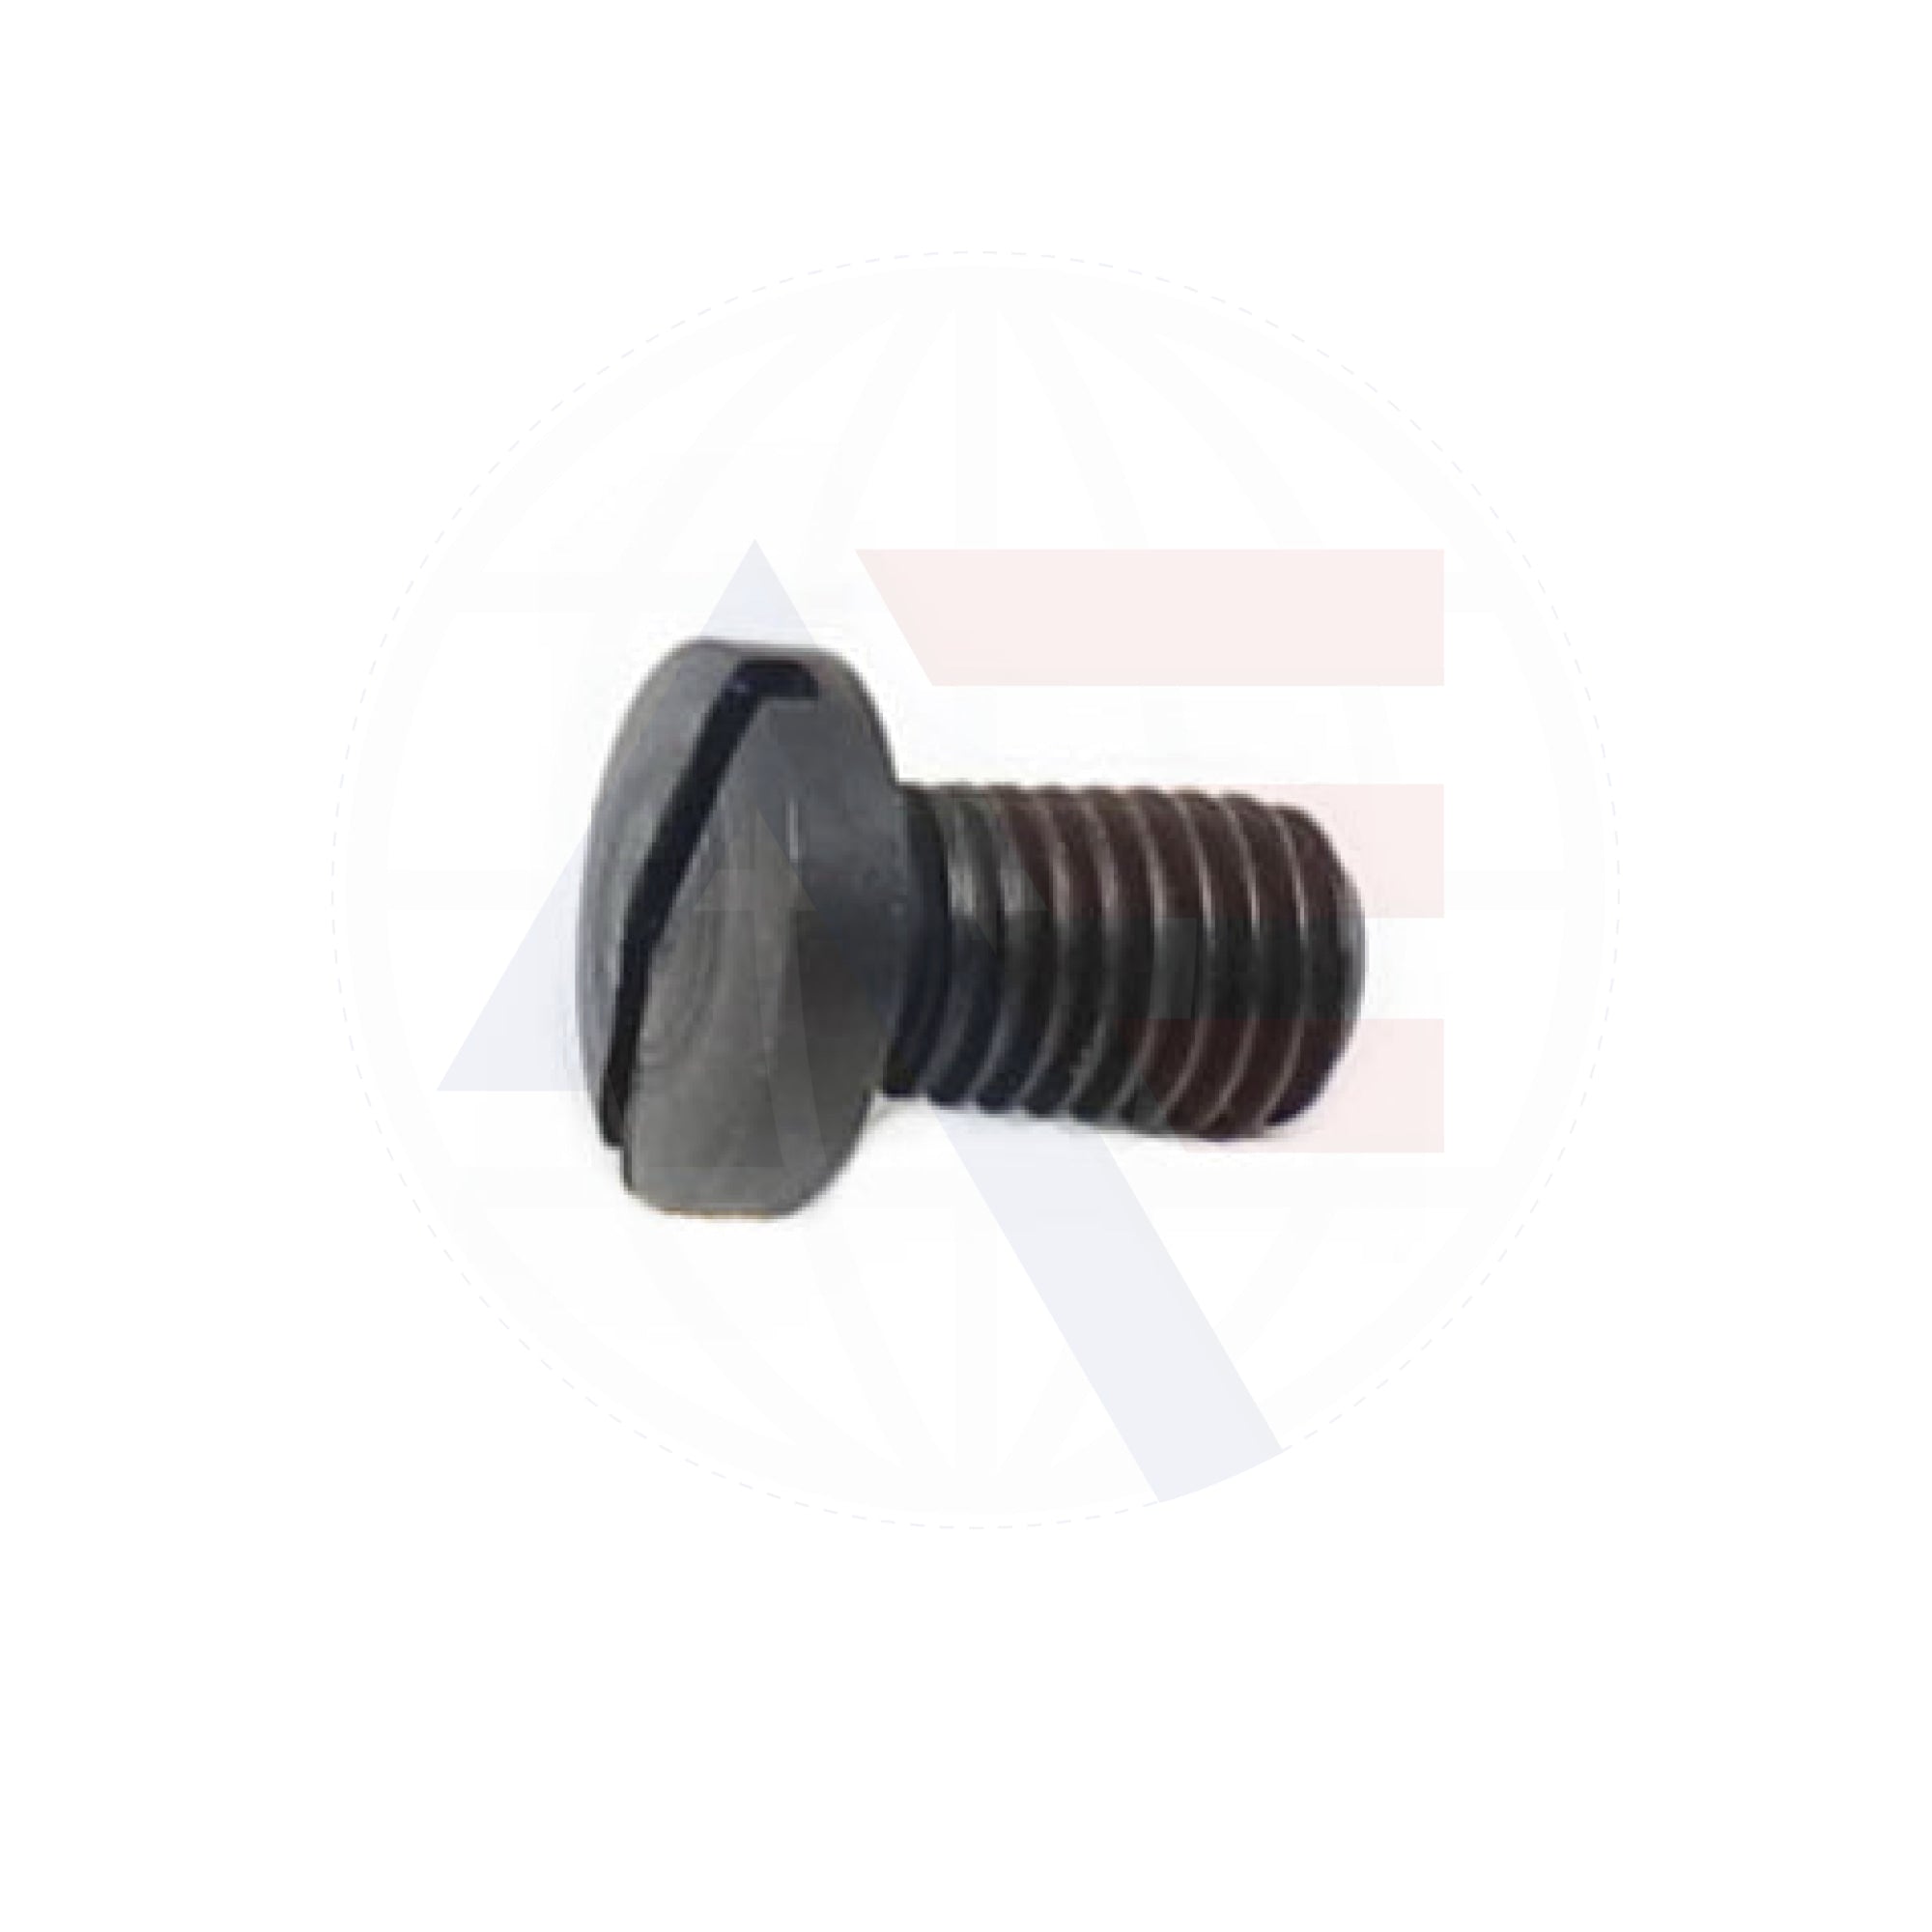 Ss7110740Tp Top Feed Screw